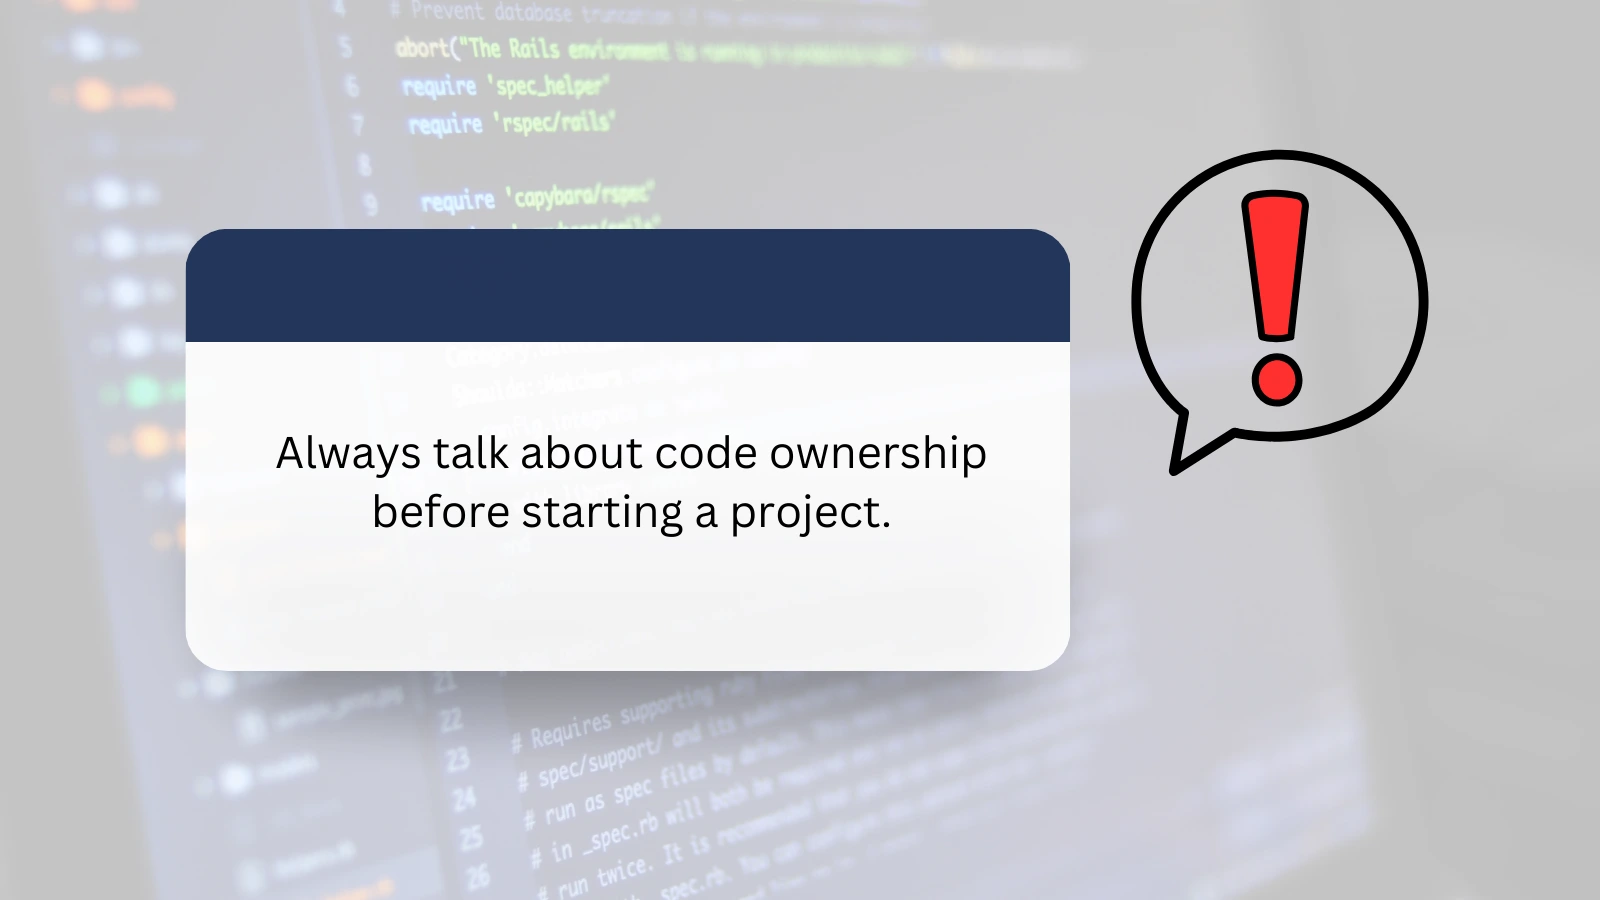 Code Ownership 101: What It Is, Why It Matters, and How We Do It Differently 2